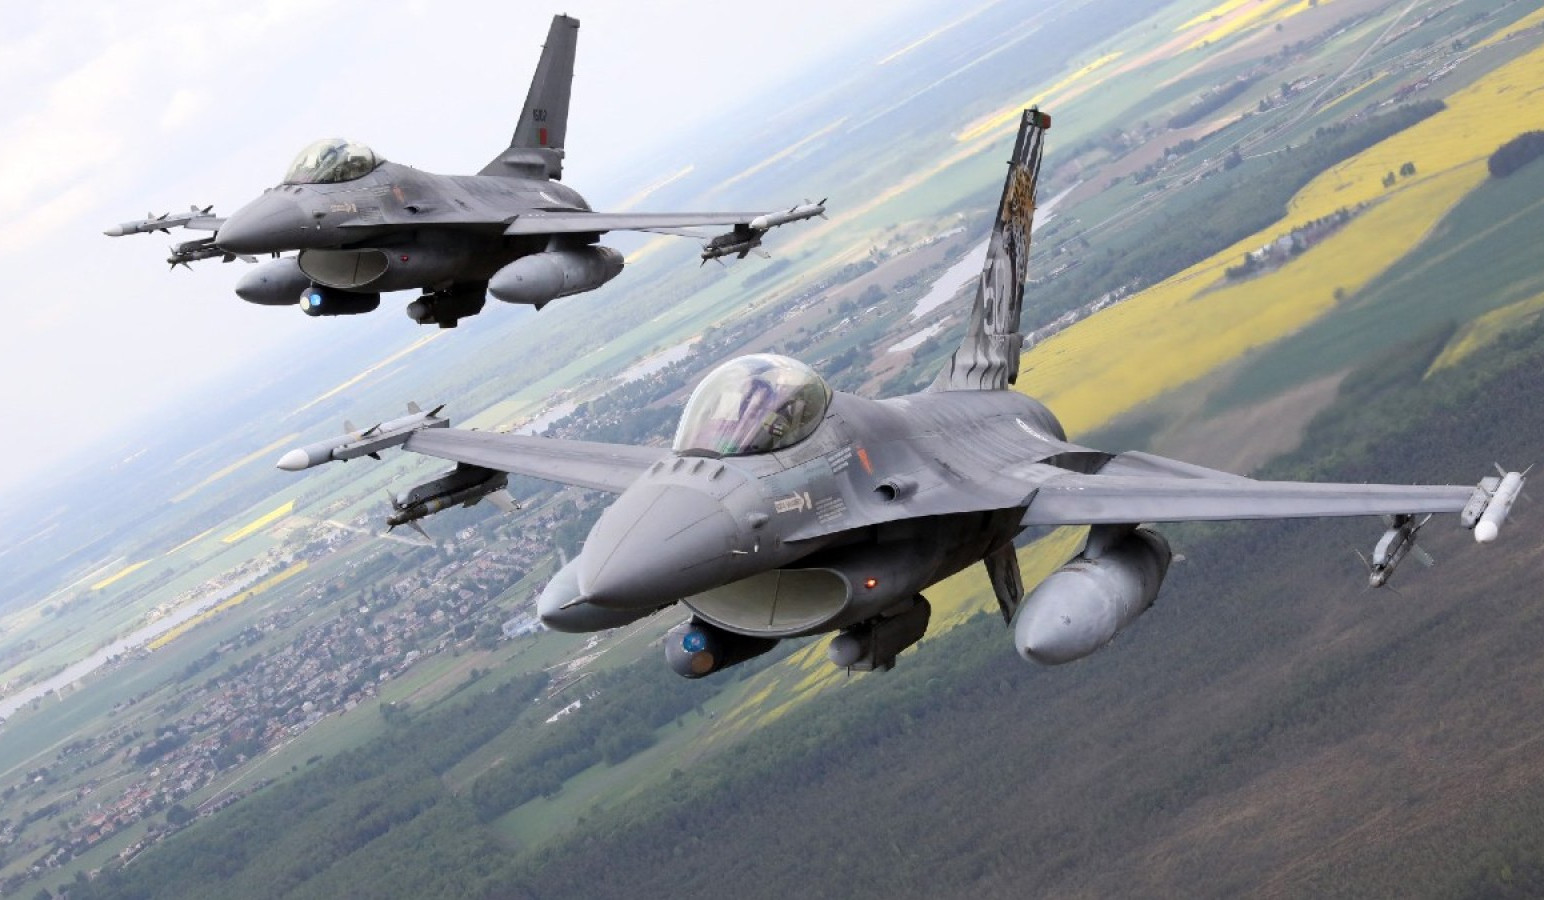 Belgium may deliver first F-16 jets to Ukraine